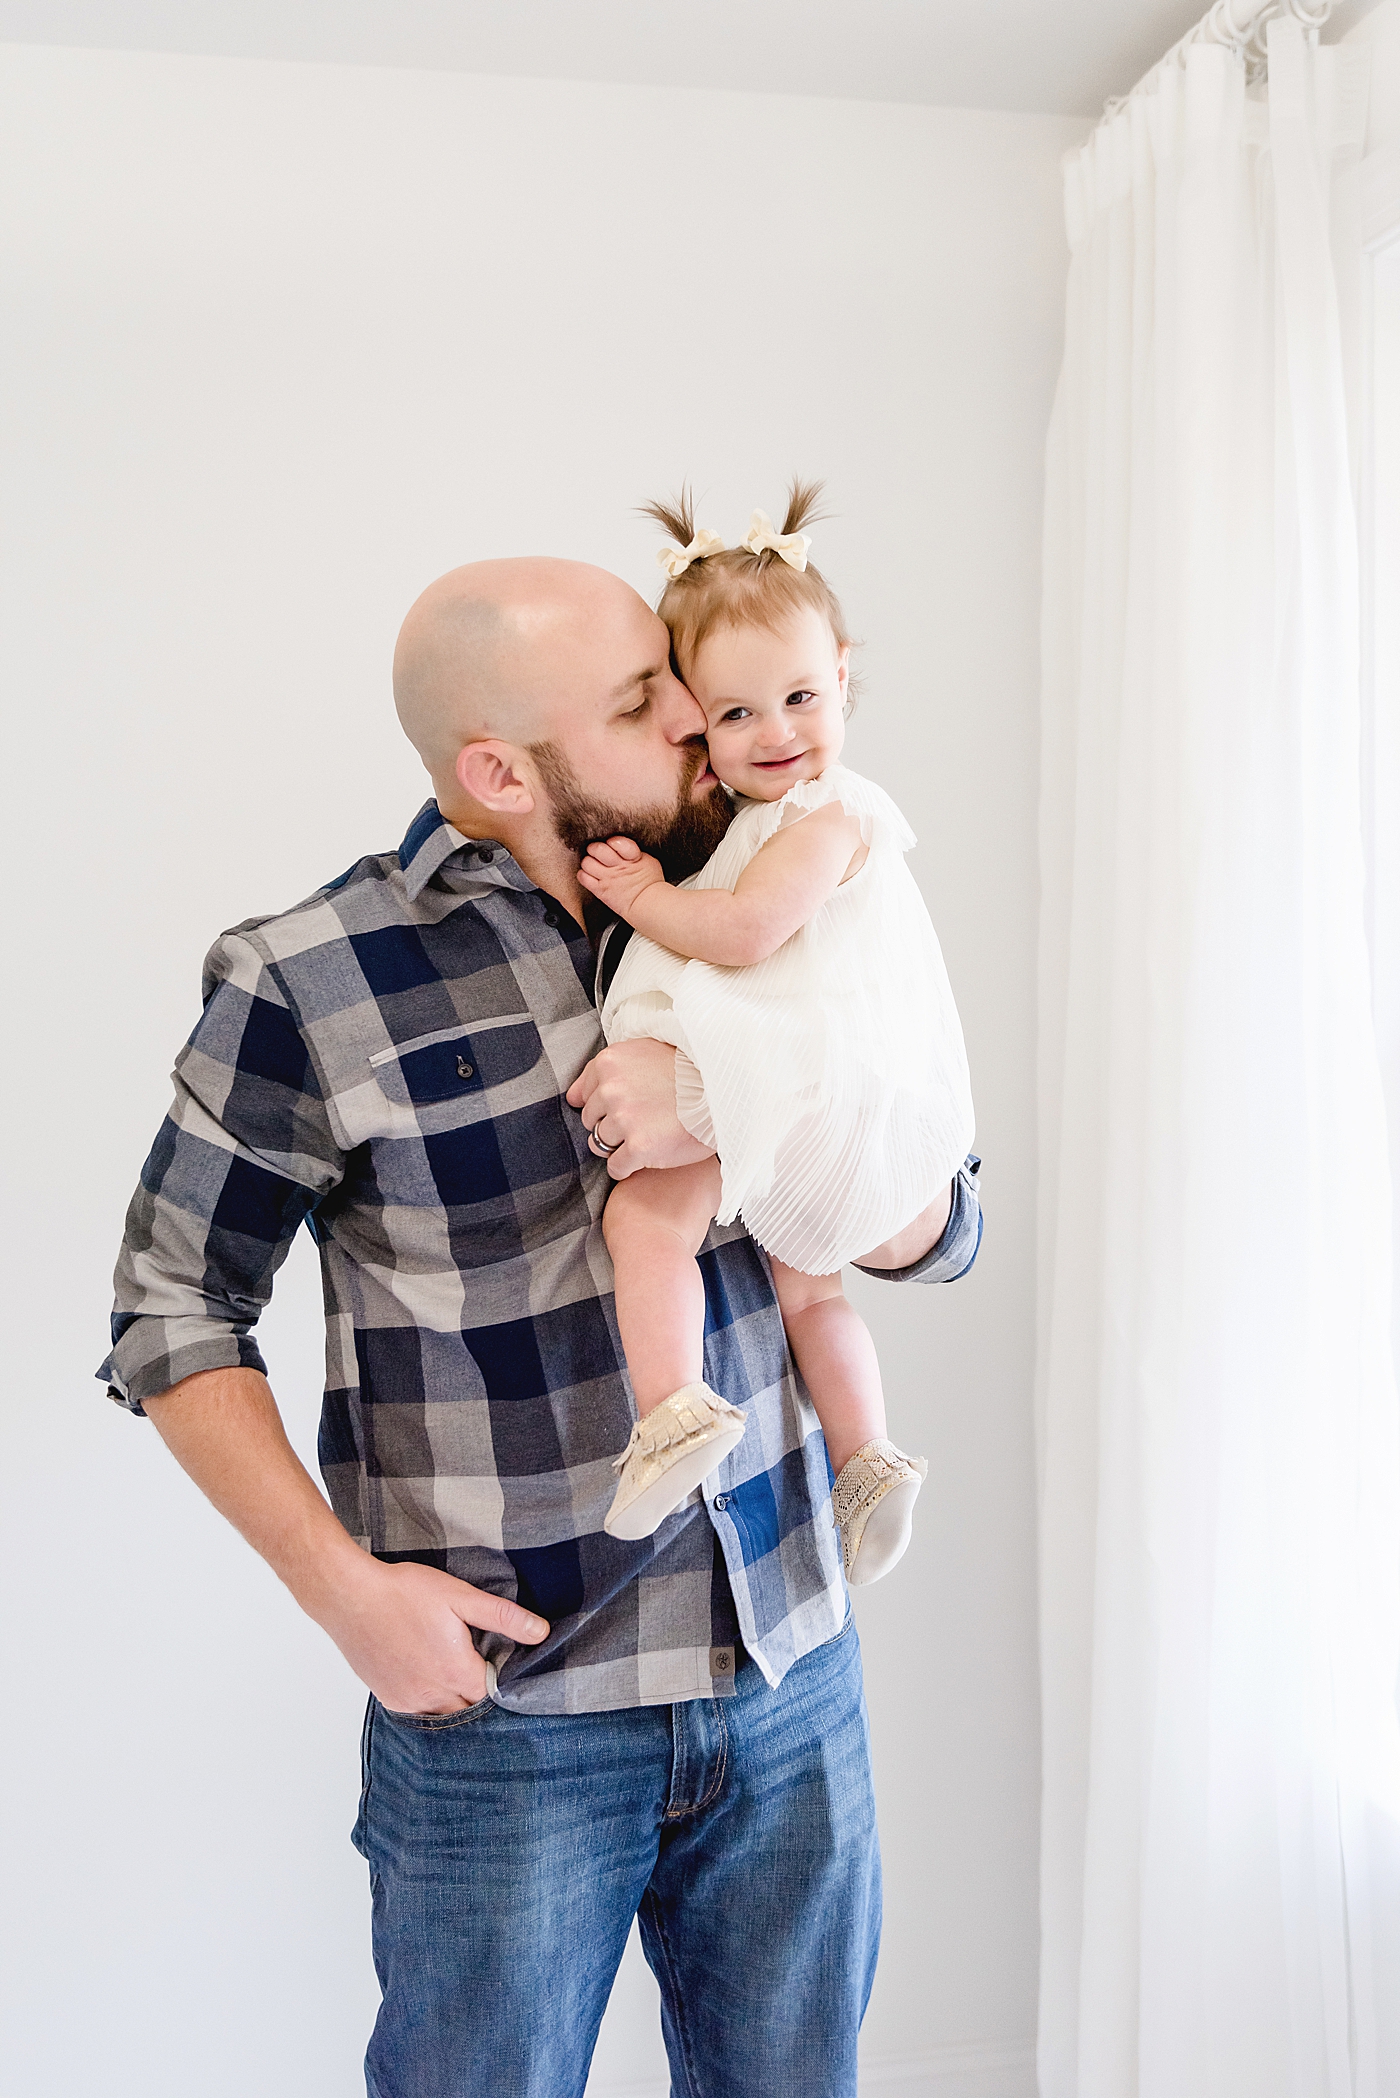 Dad in blue giving baby girl a kiss on the cheek | Photo by Anna Wisjo Photography